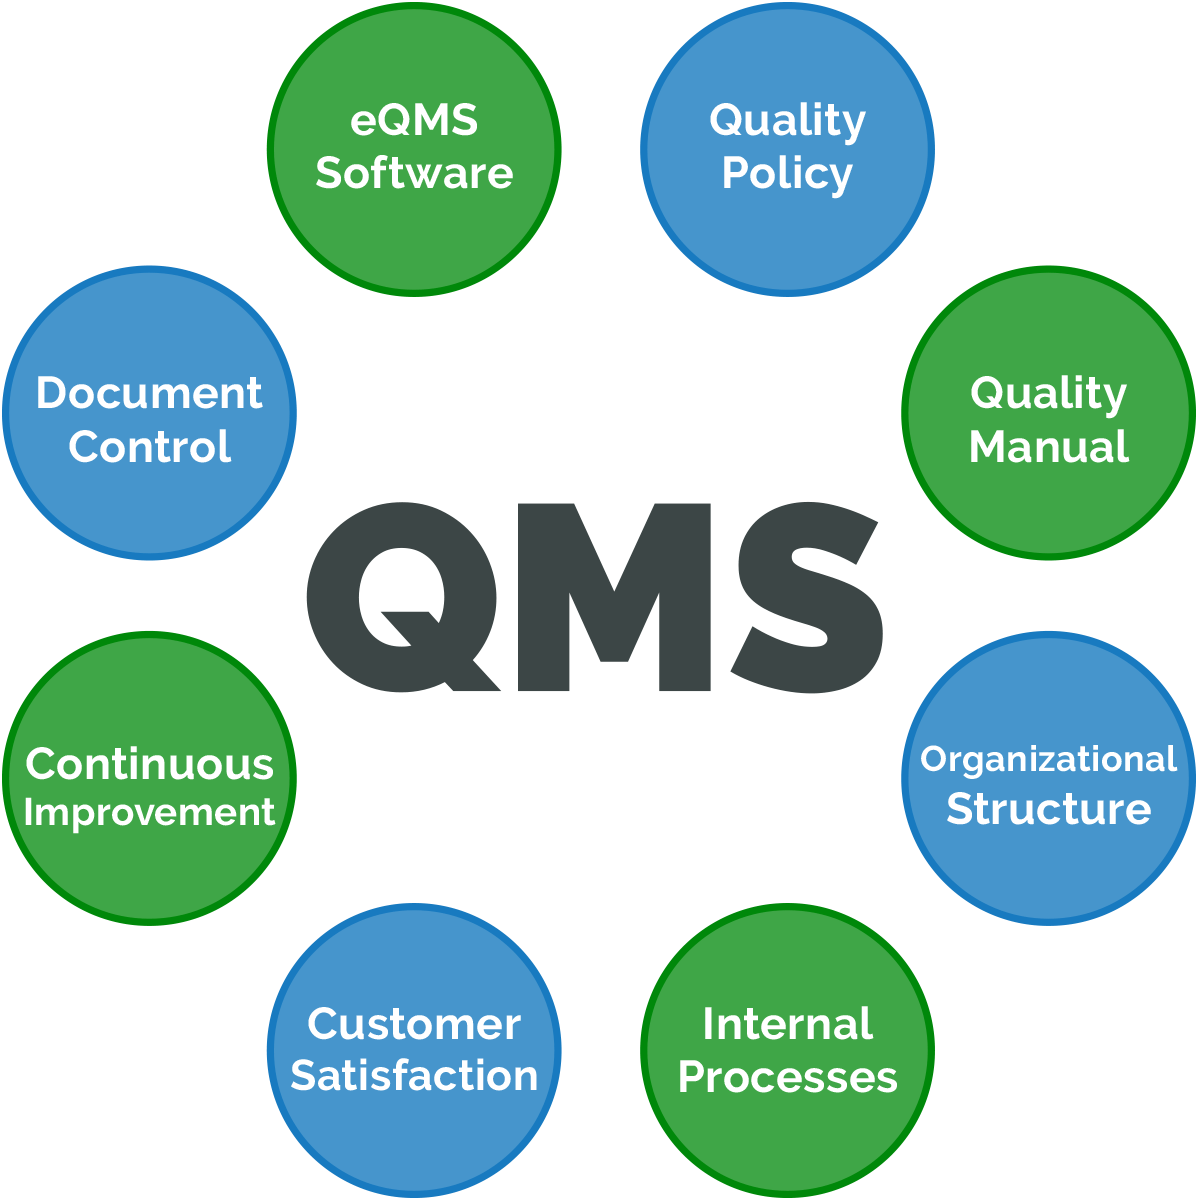 quality control system in business plan